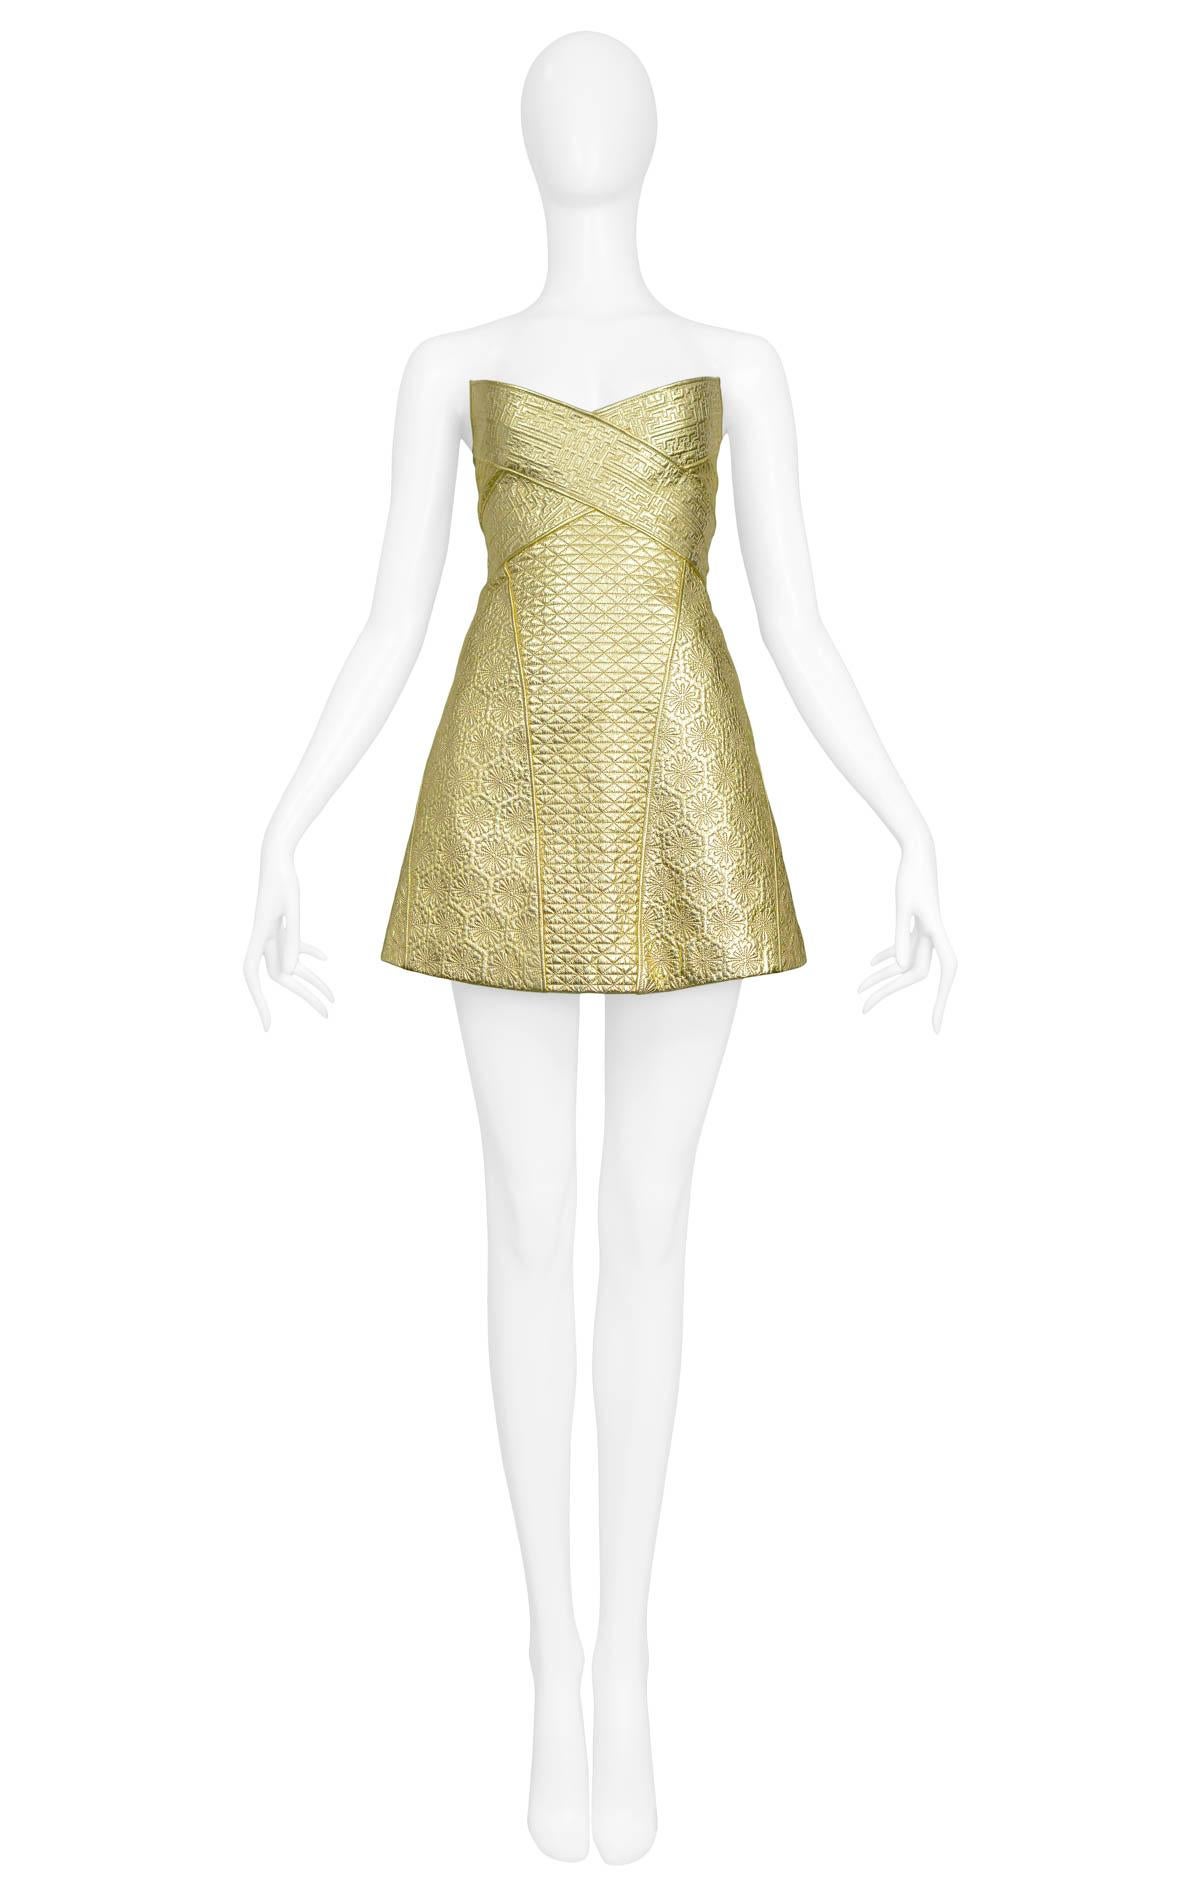 Vintage Alexander McQueen quilted gold leather armor dress. From the In Memory Of Elizabeth How, Salem 1692 Autumn/Winter 2007 Collection.

Excellent Condition.

Size: 40